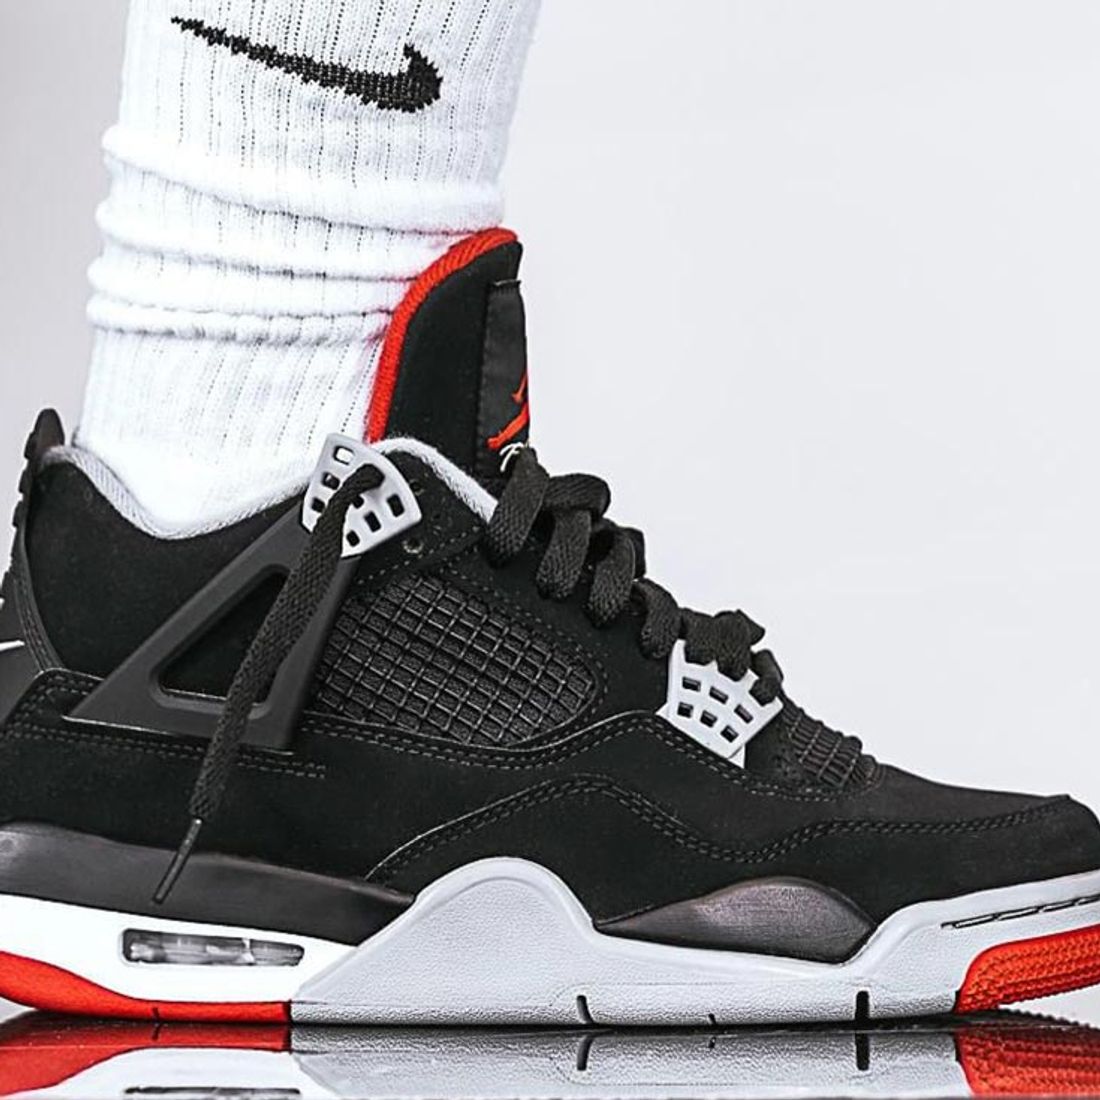 Here's People are Styling the Air Jordan 4 'Bred'